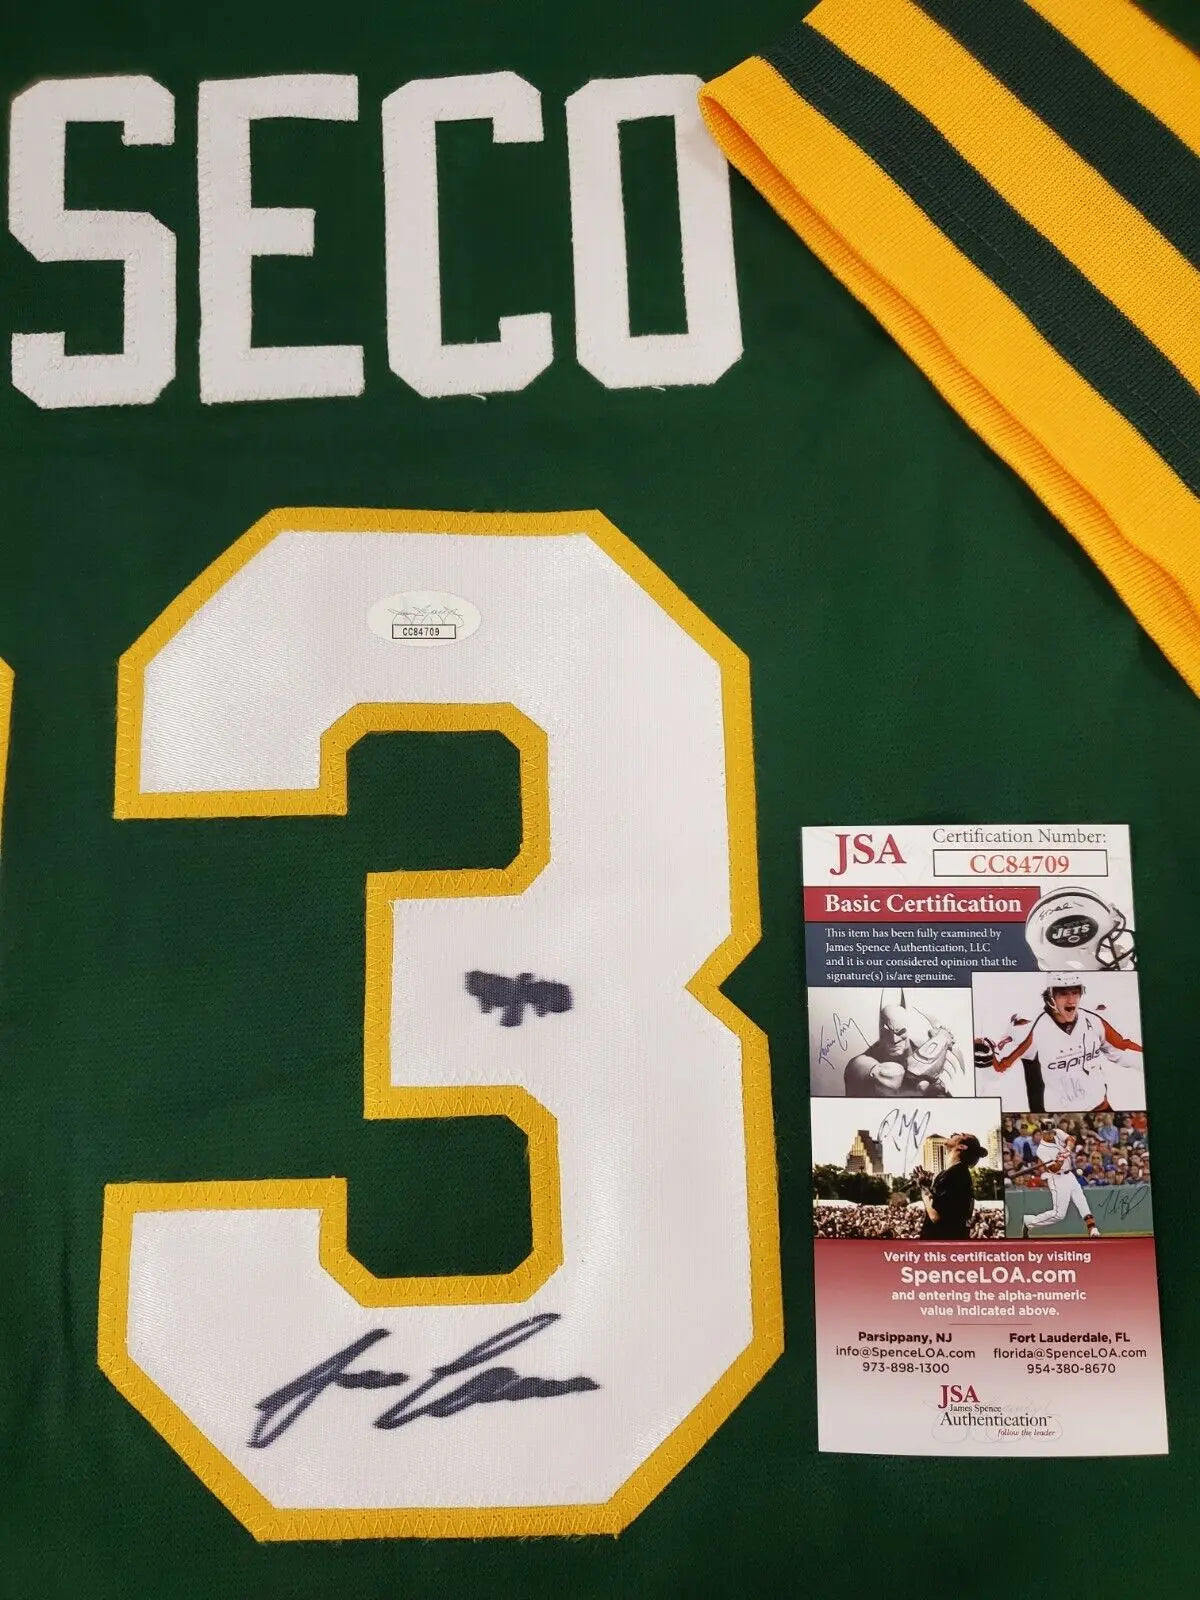 Autographed Red Sox Jersey- Jose Canseco #33 – Merrymaconline